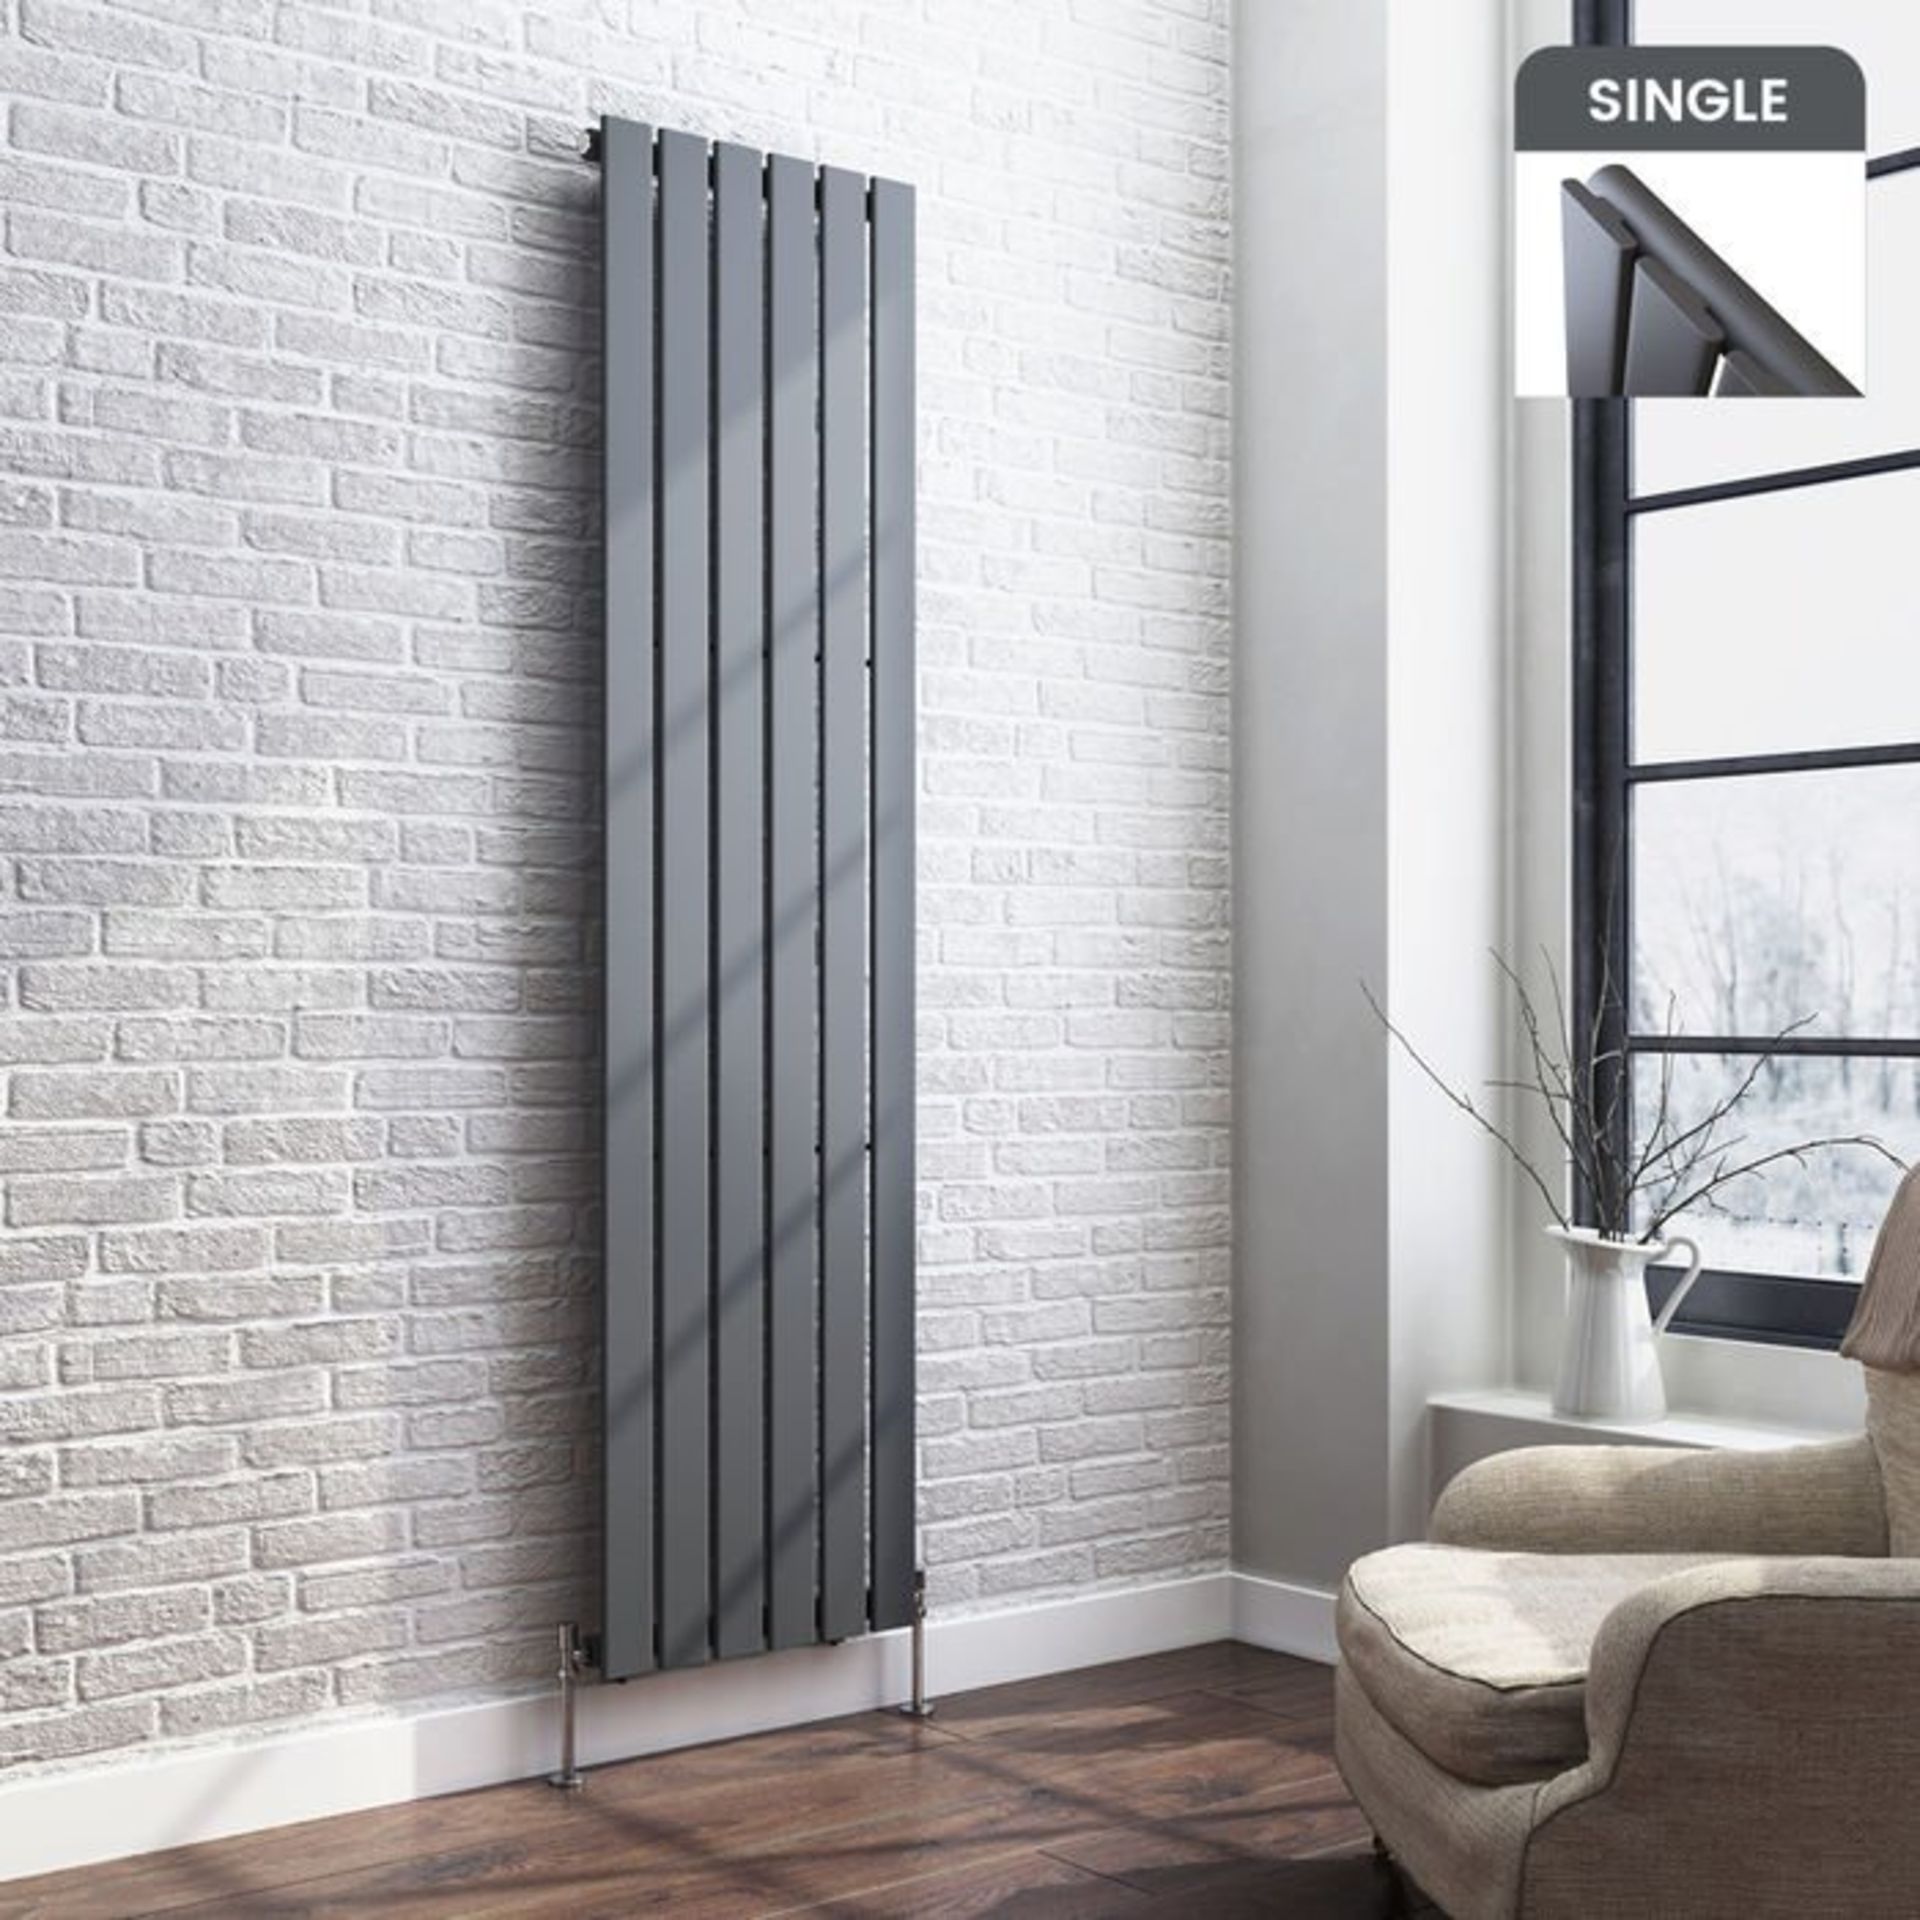 (Z4) 1800x452mm Anthracite Single Flat Panel Vertical Radiator. MRRP £249.99. Made with low carbon